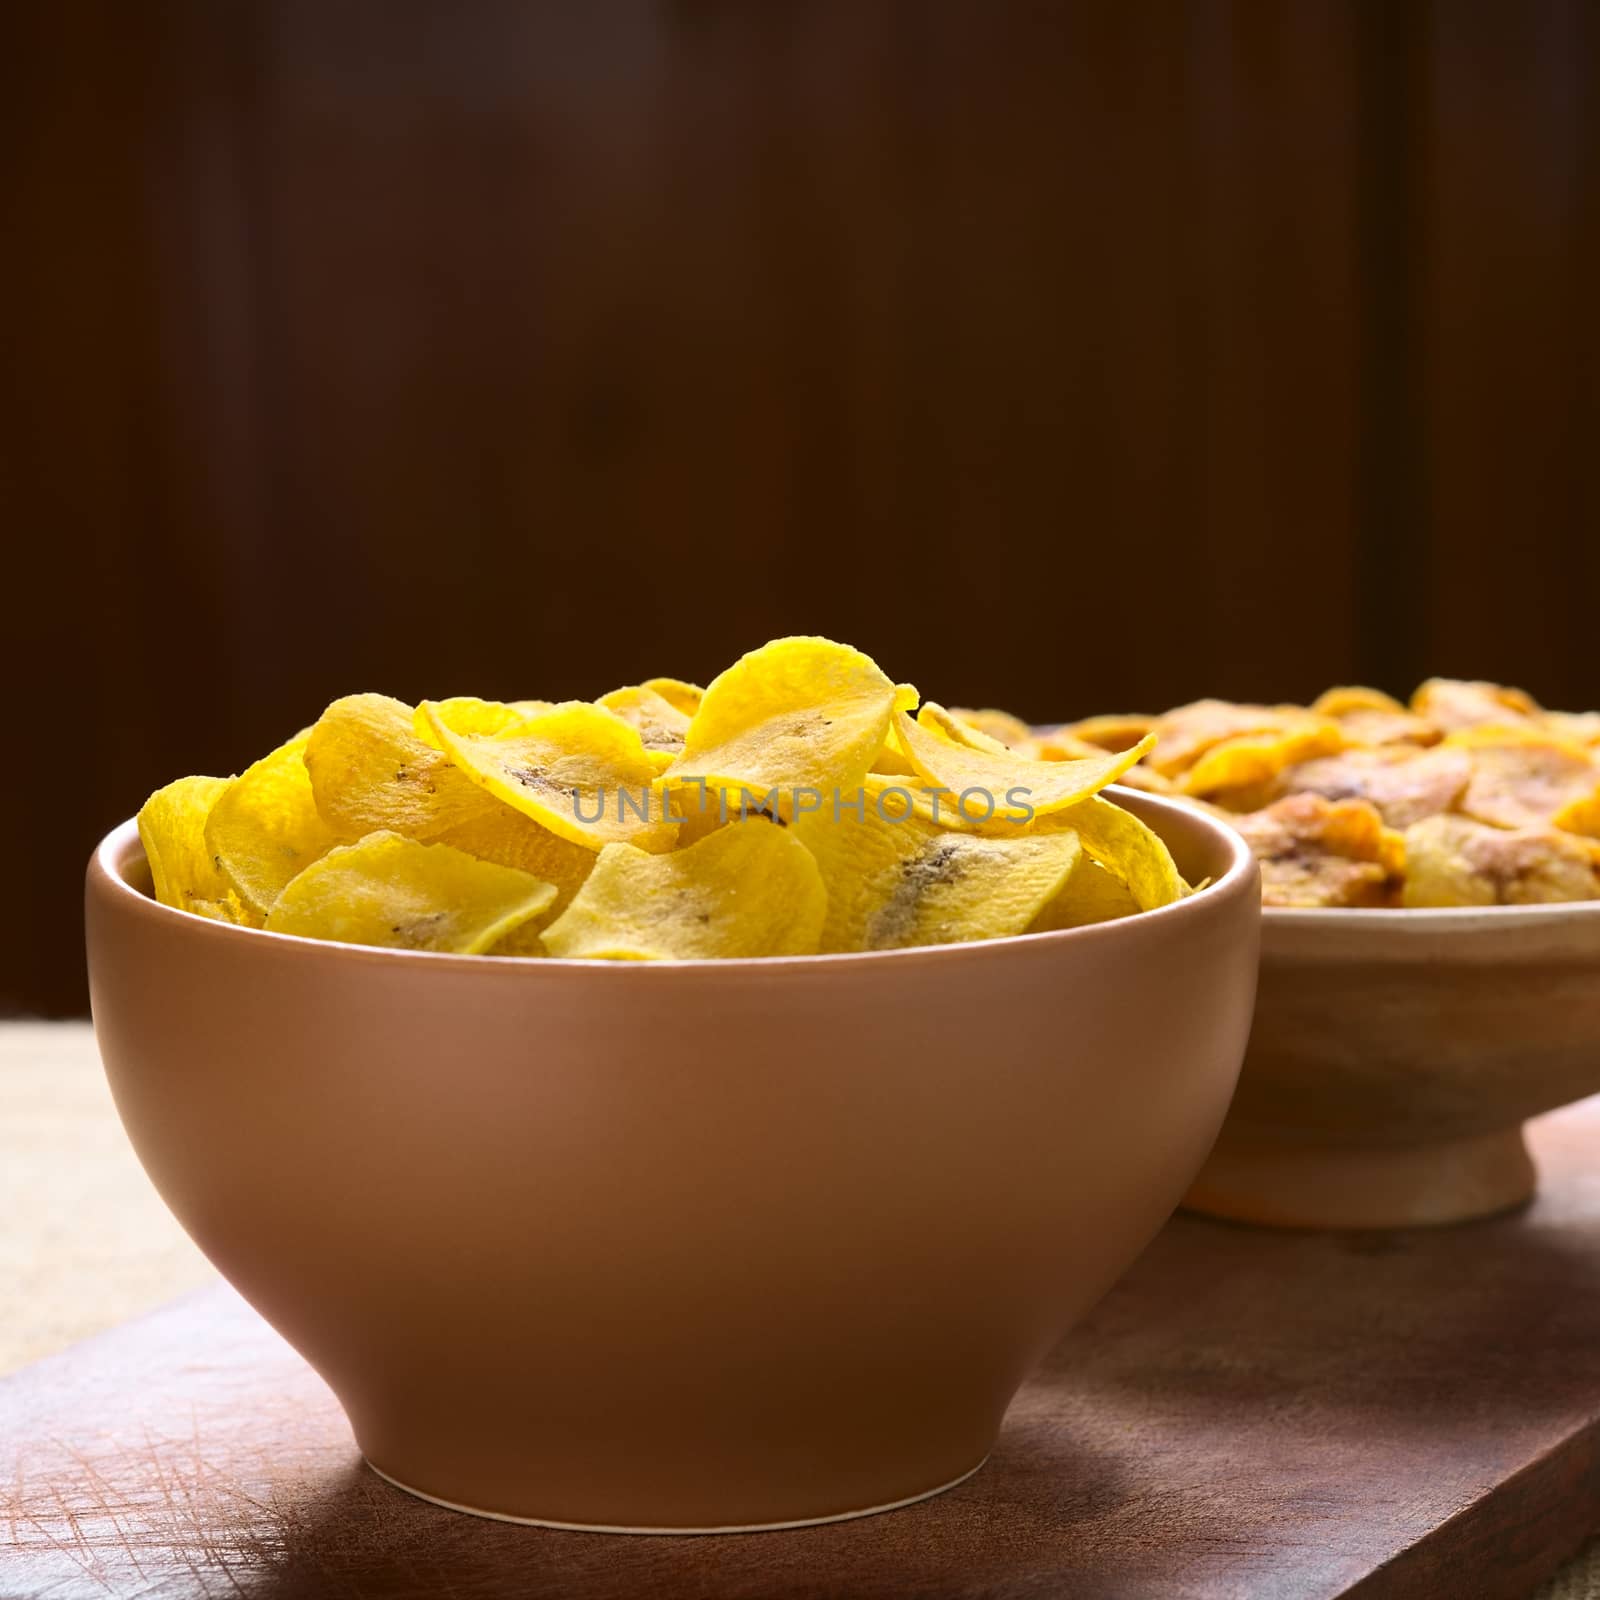 Salty and Sweet Plantain Chips by ildi